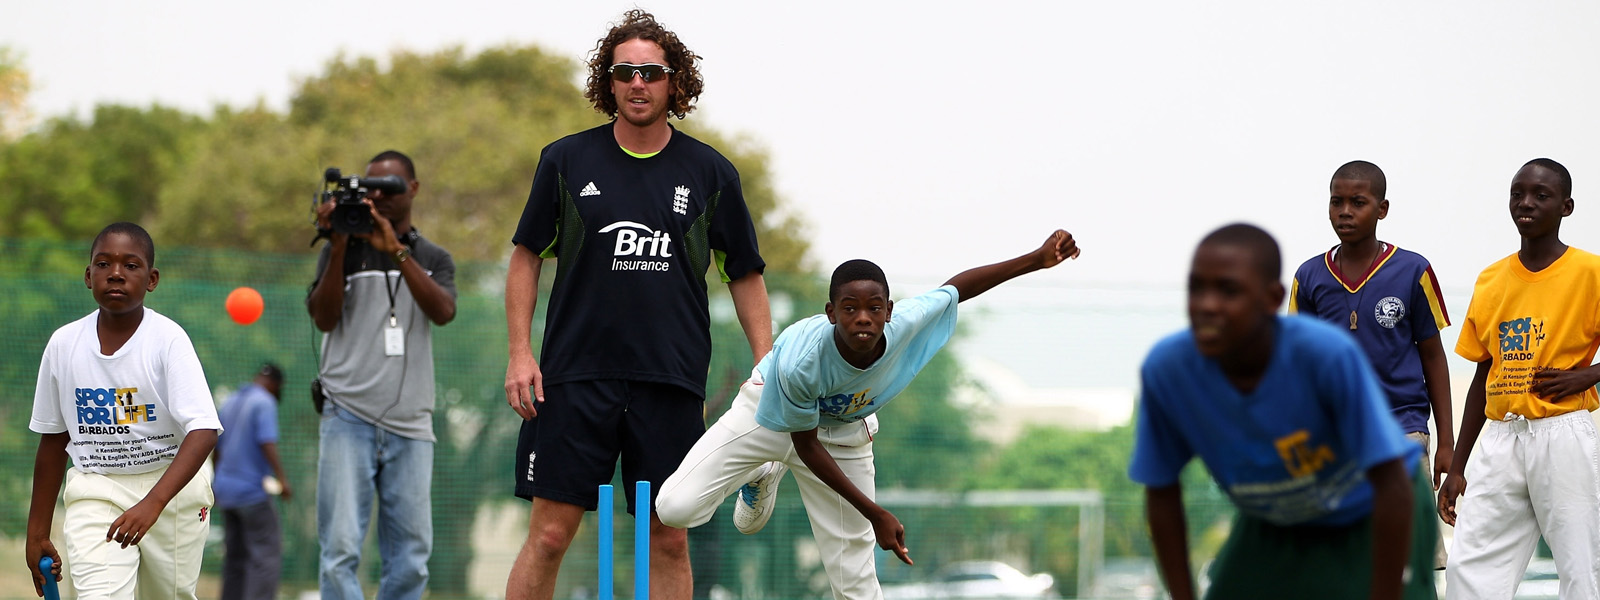 sport for life in action - west indies